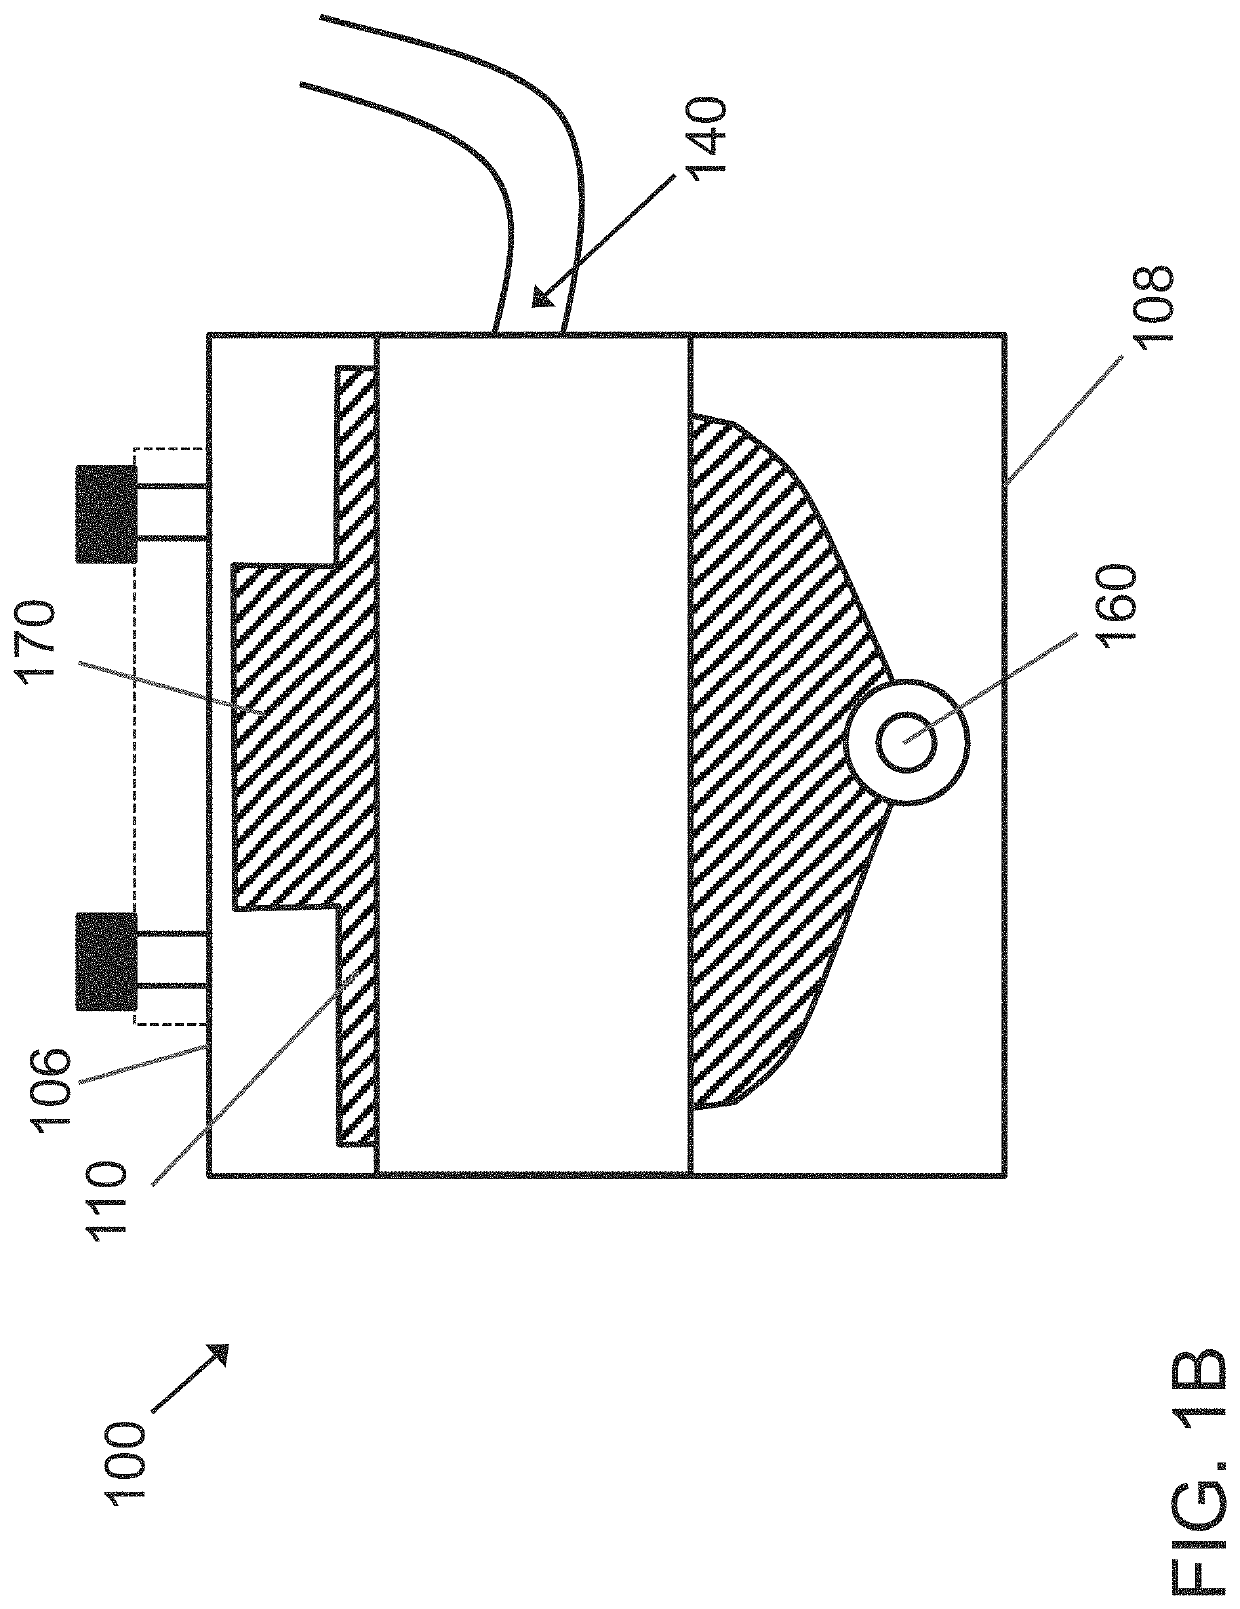 Acoustic blood separation processes and devices